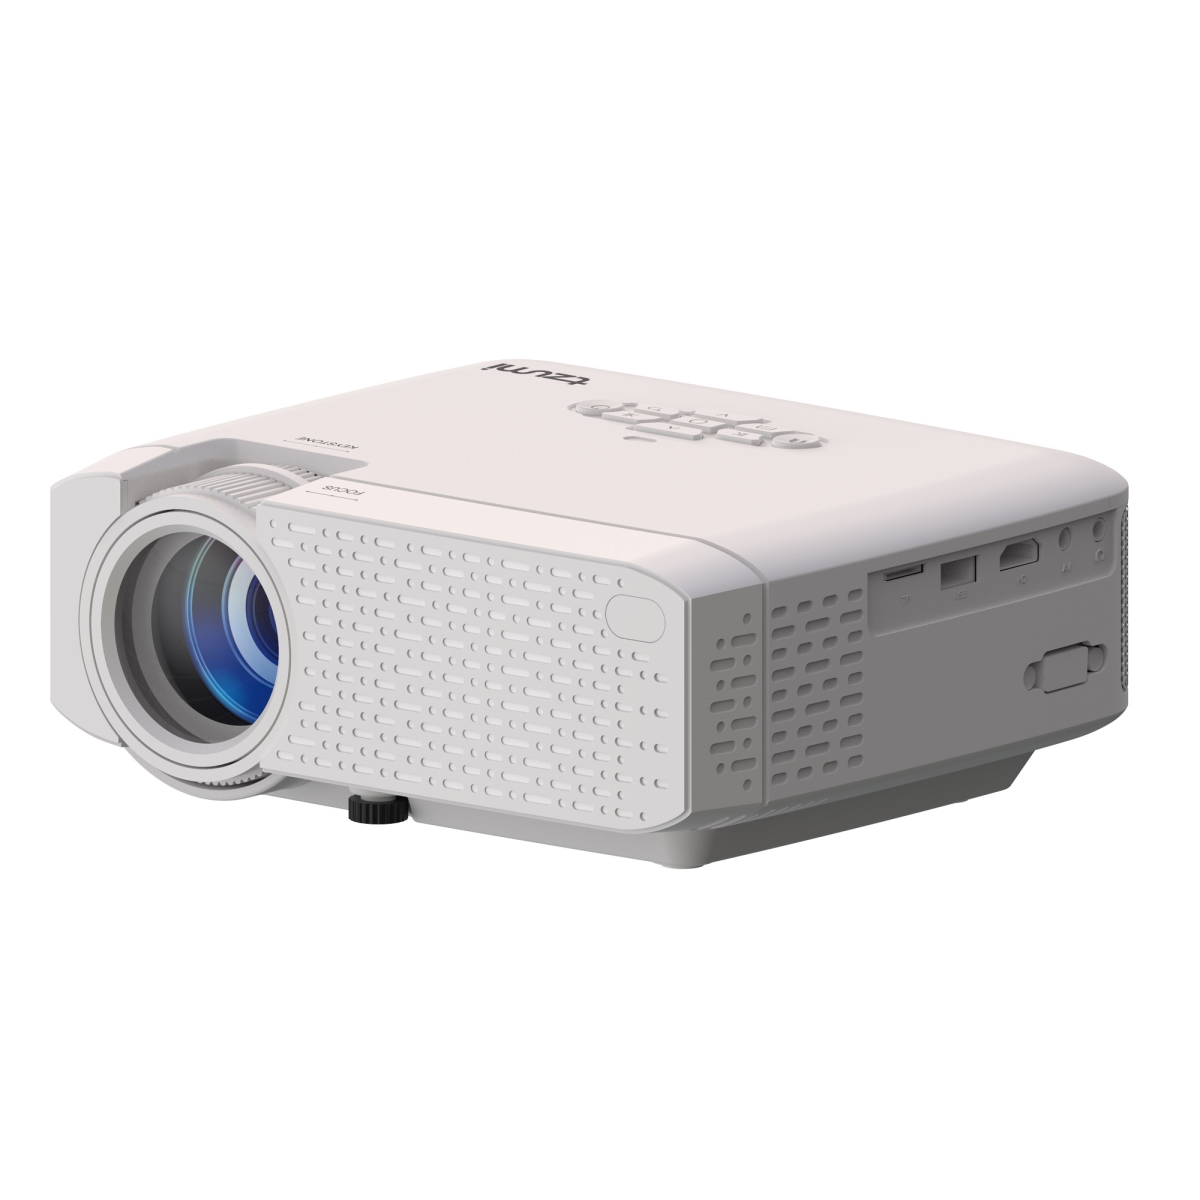 Picture of Tzumi 7796 LED Home Go Theater Wi-Fi Cinema Projector